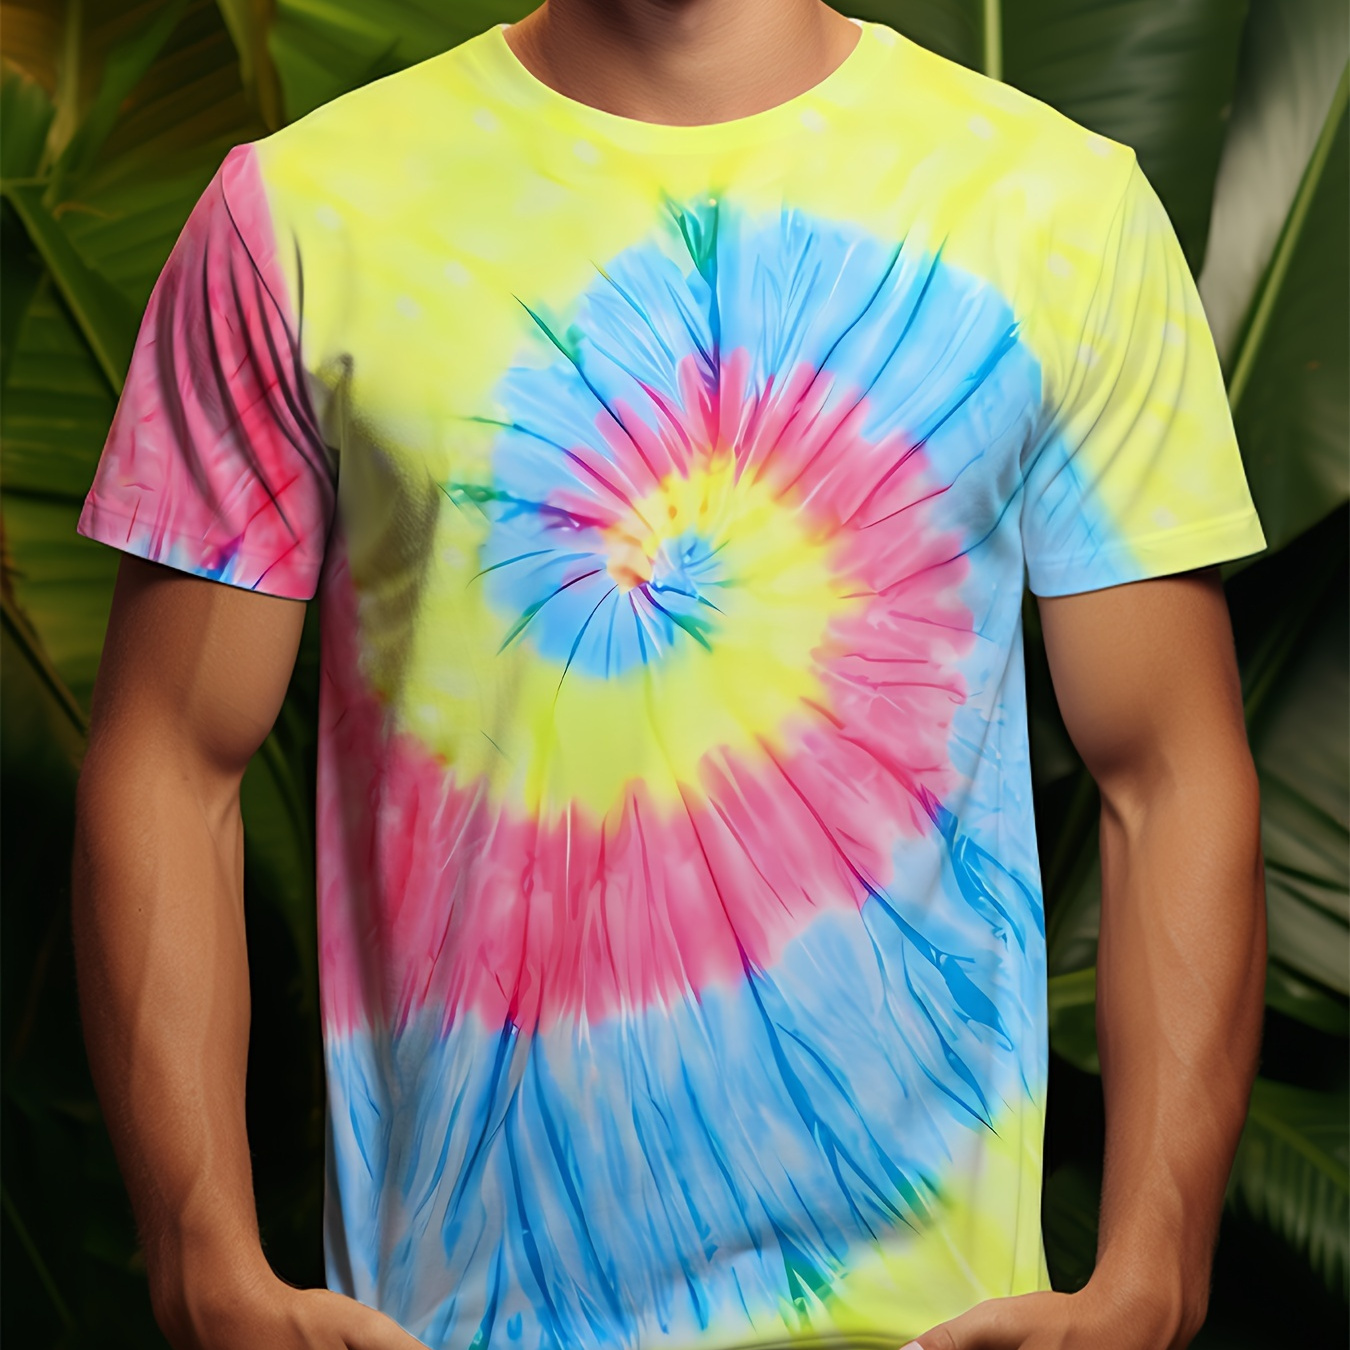 Plus Size Men's Colorful Tie Dye Pattern Graphic Print T-Shirt for Summer, Trendy Cool Short Sleeve Tees for Big & Tall Males,Casual,Temu